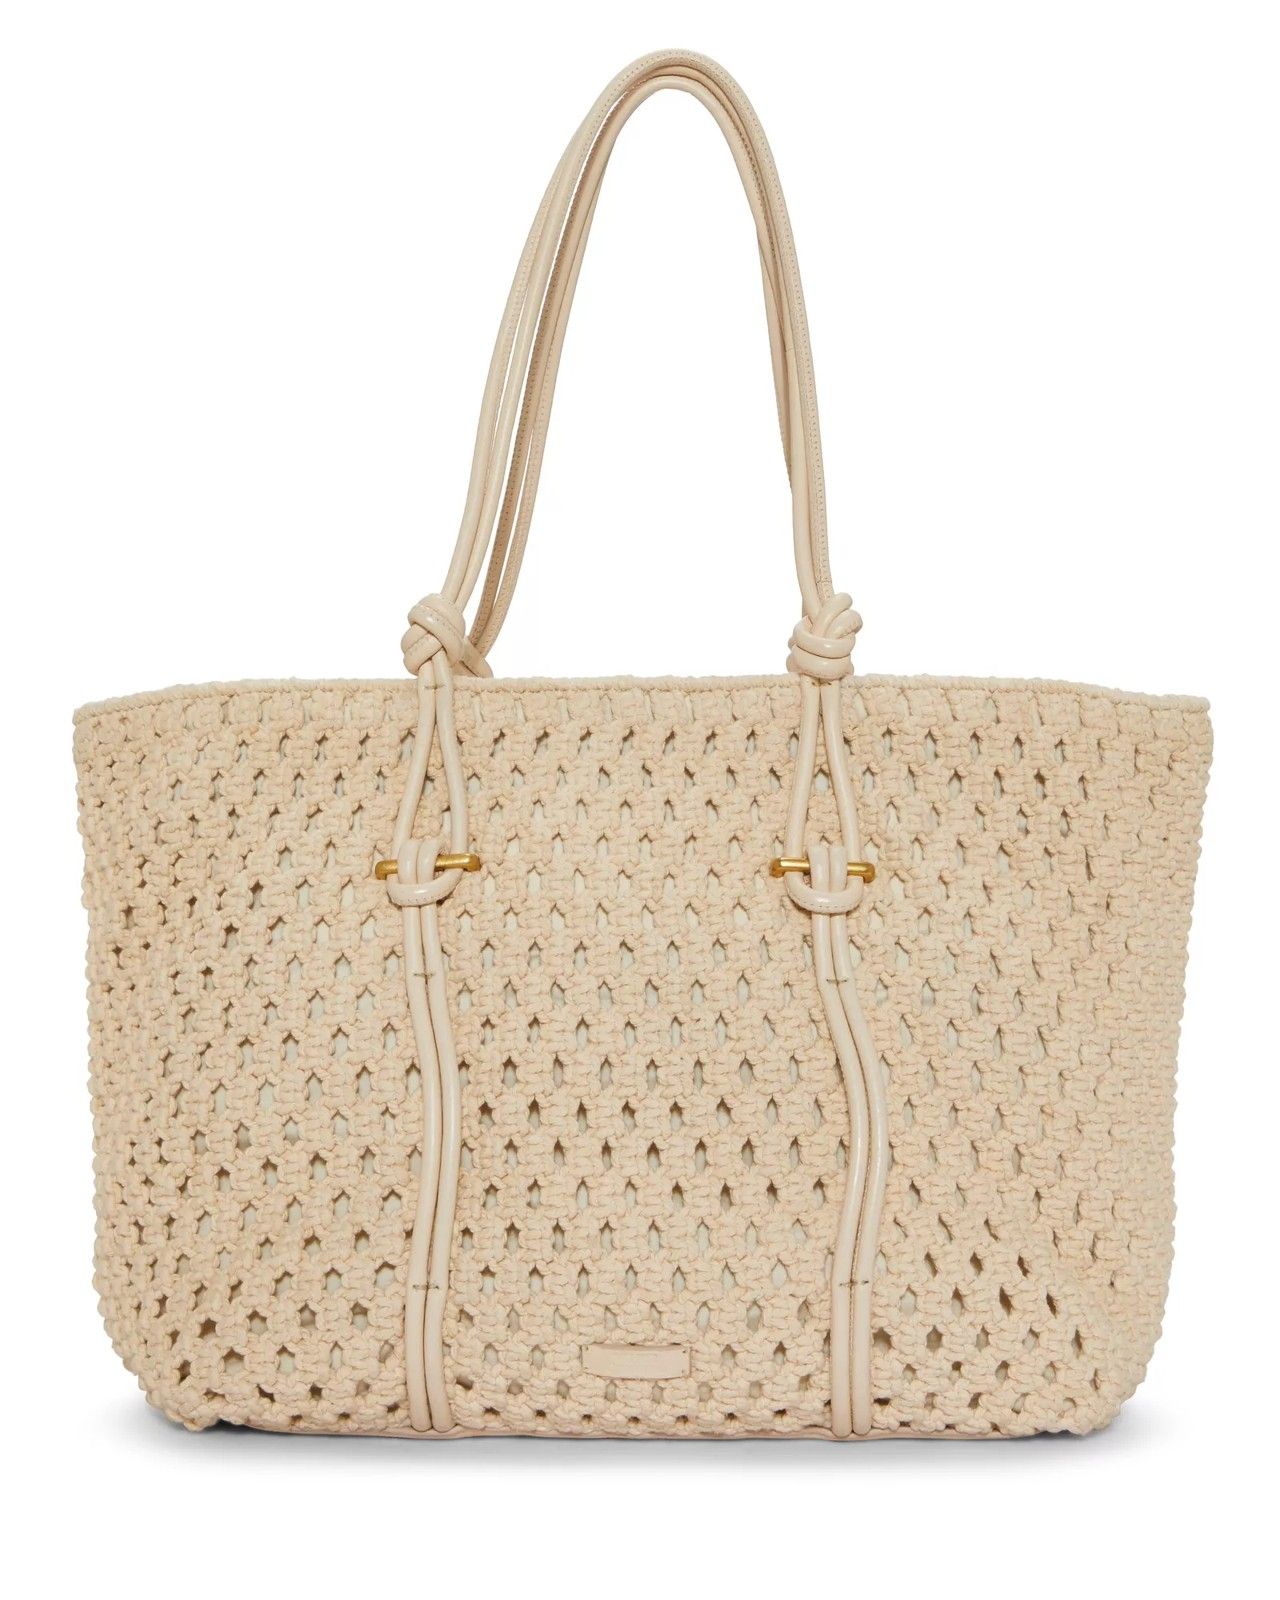 Vince Camuto Lynne Crocheted Tote | Vince Camuto